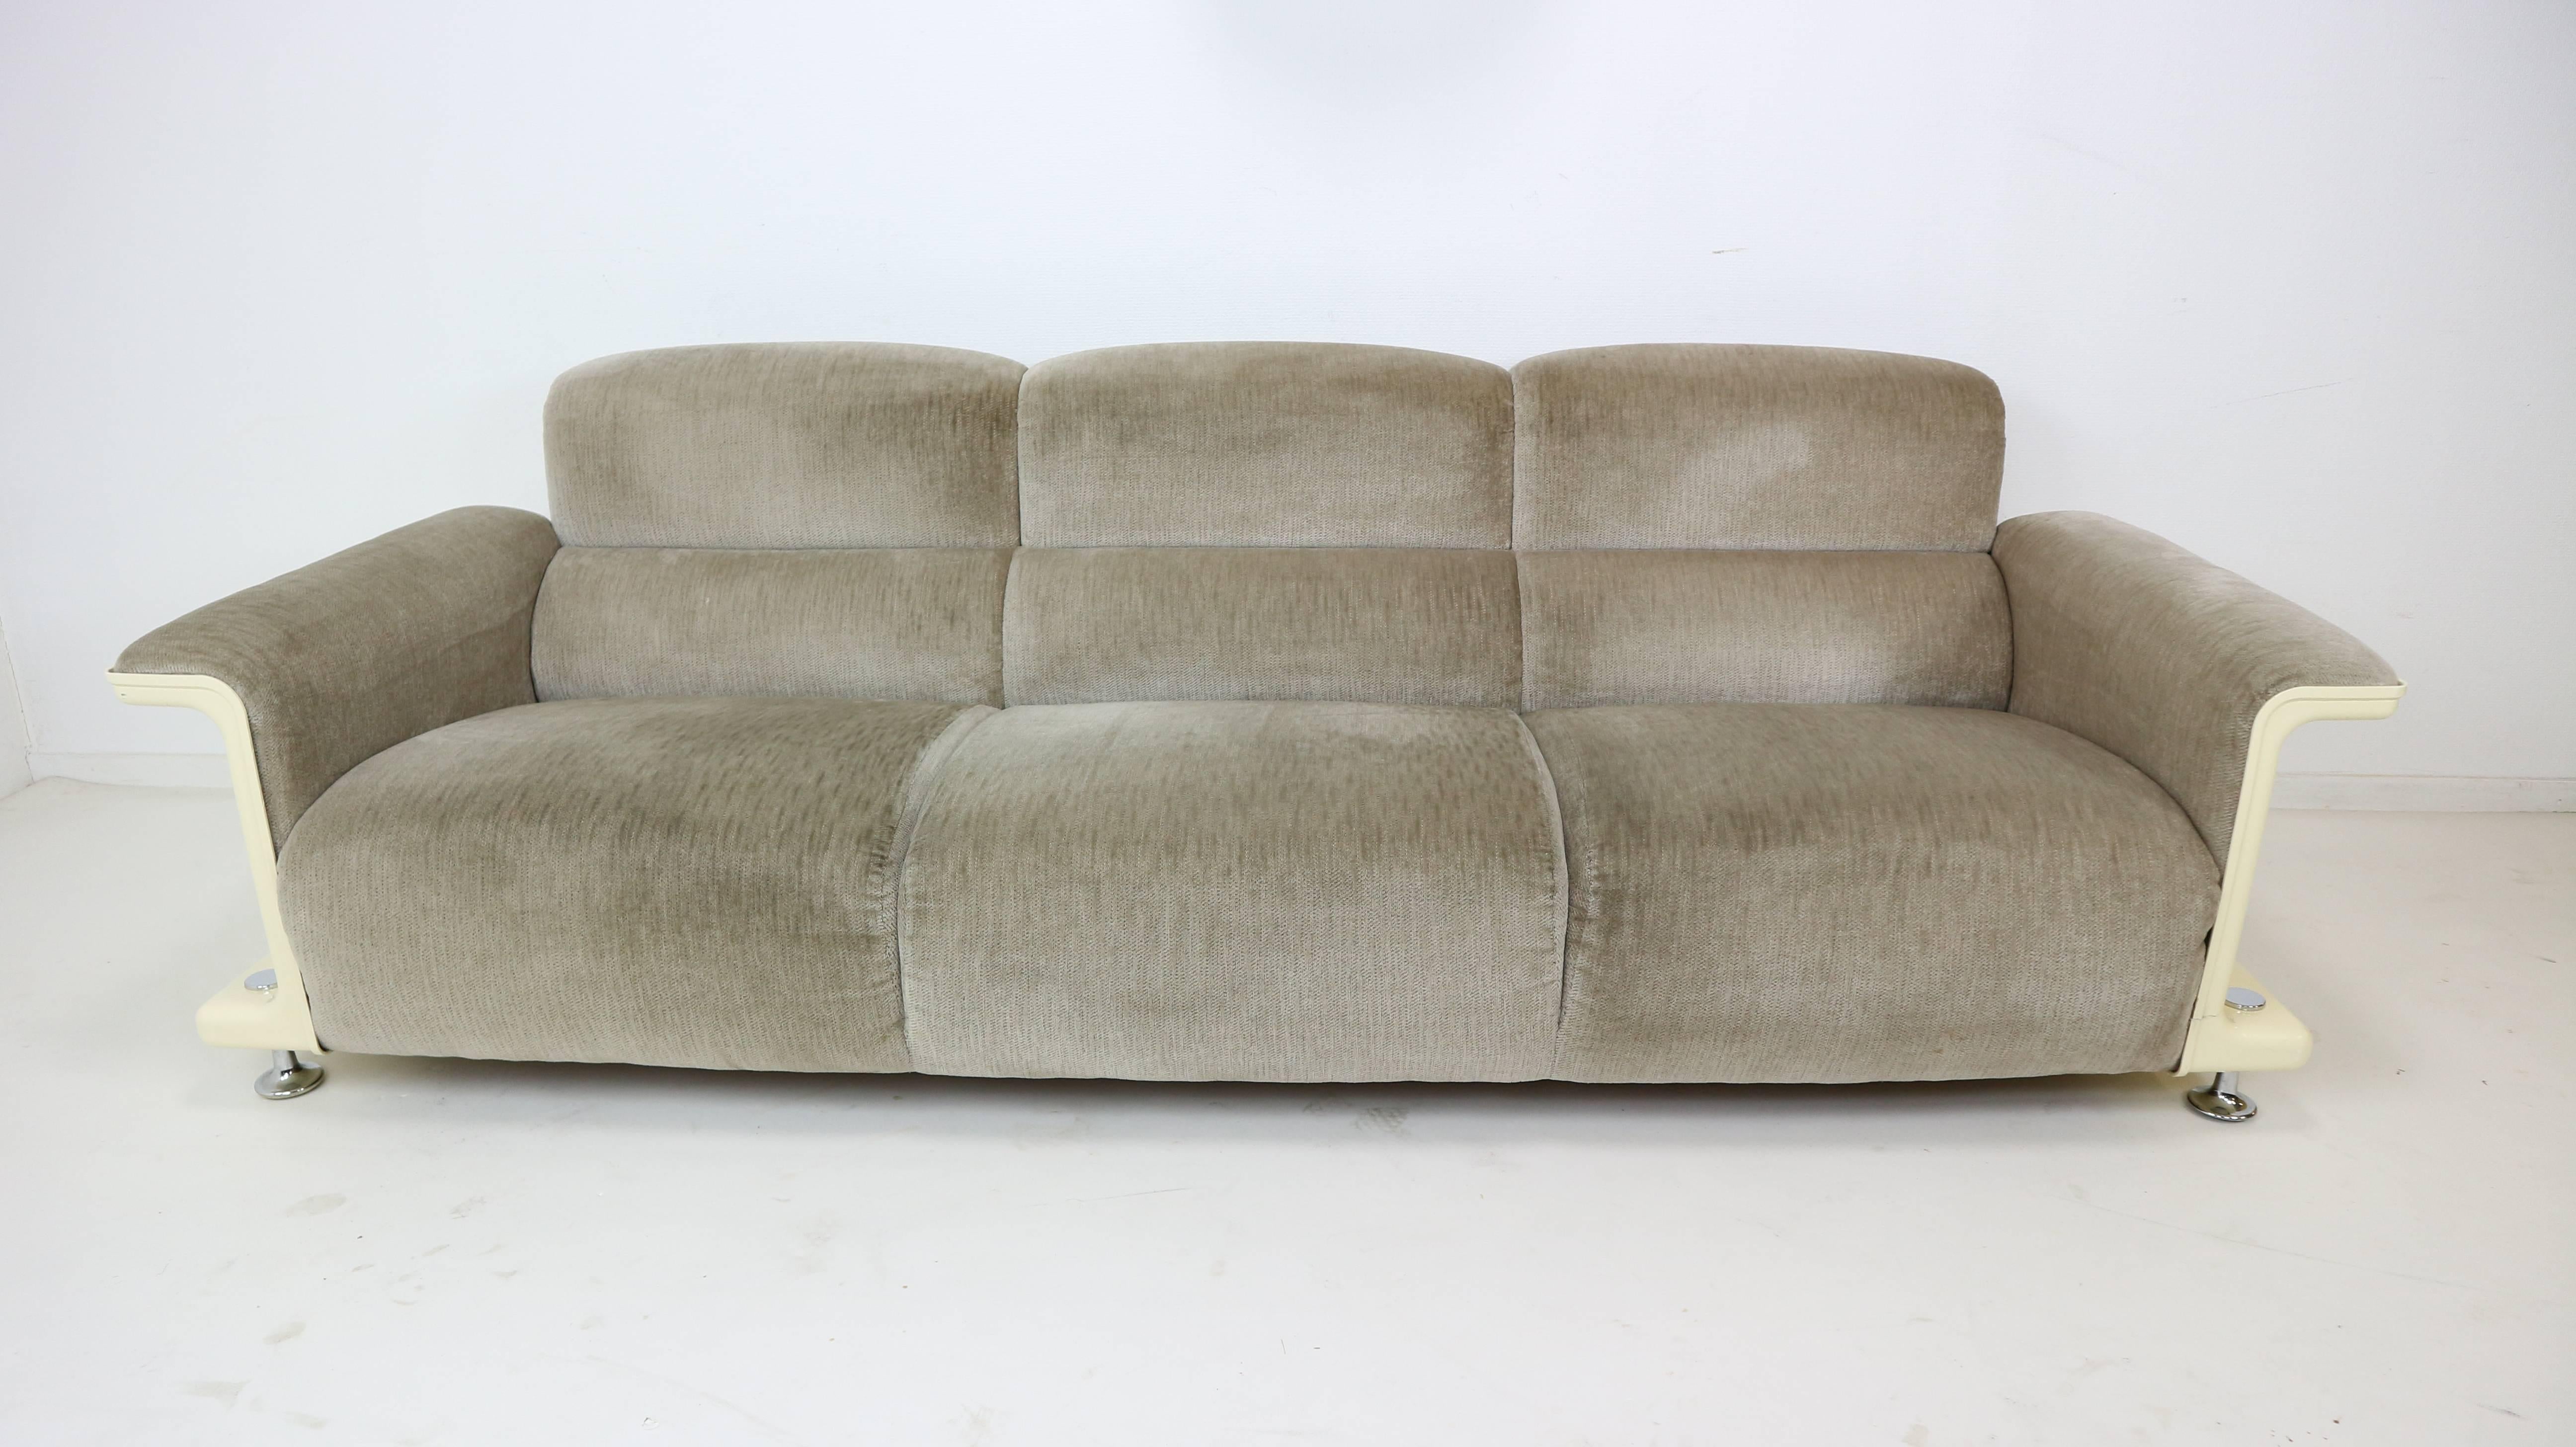 Beautifully designed three-seat sofa from the 1970s, made in the Netherlands. The shell is made from a hot-pressed sheet molding compound and its covered with a light grey velvet upholstery. 



     